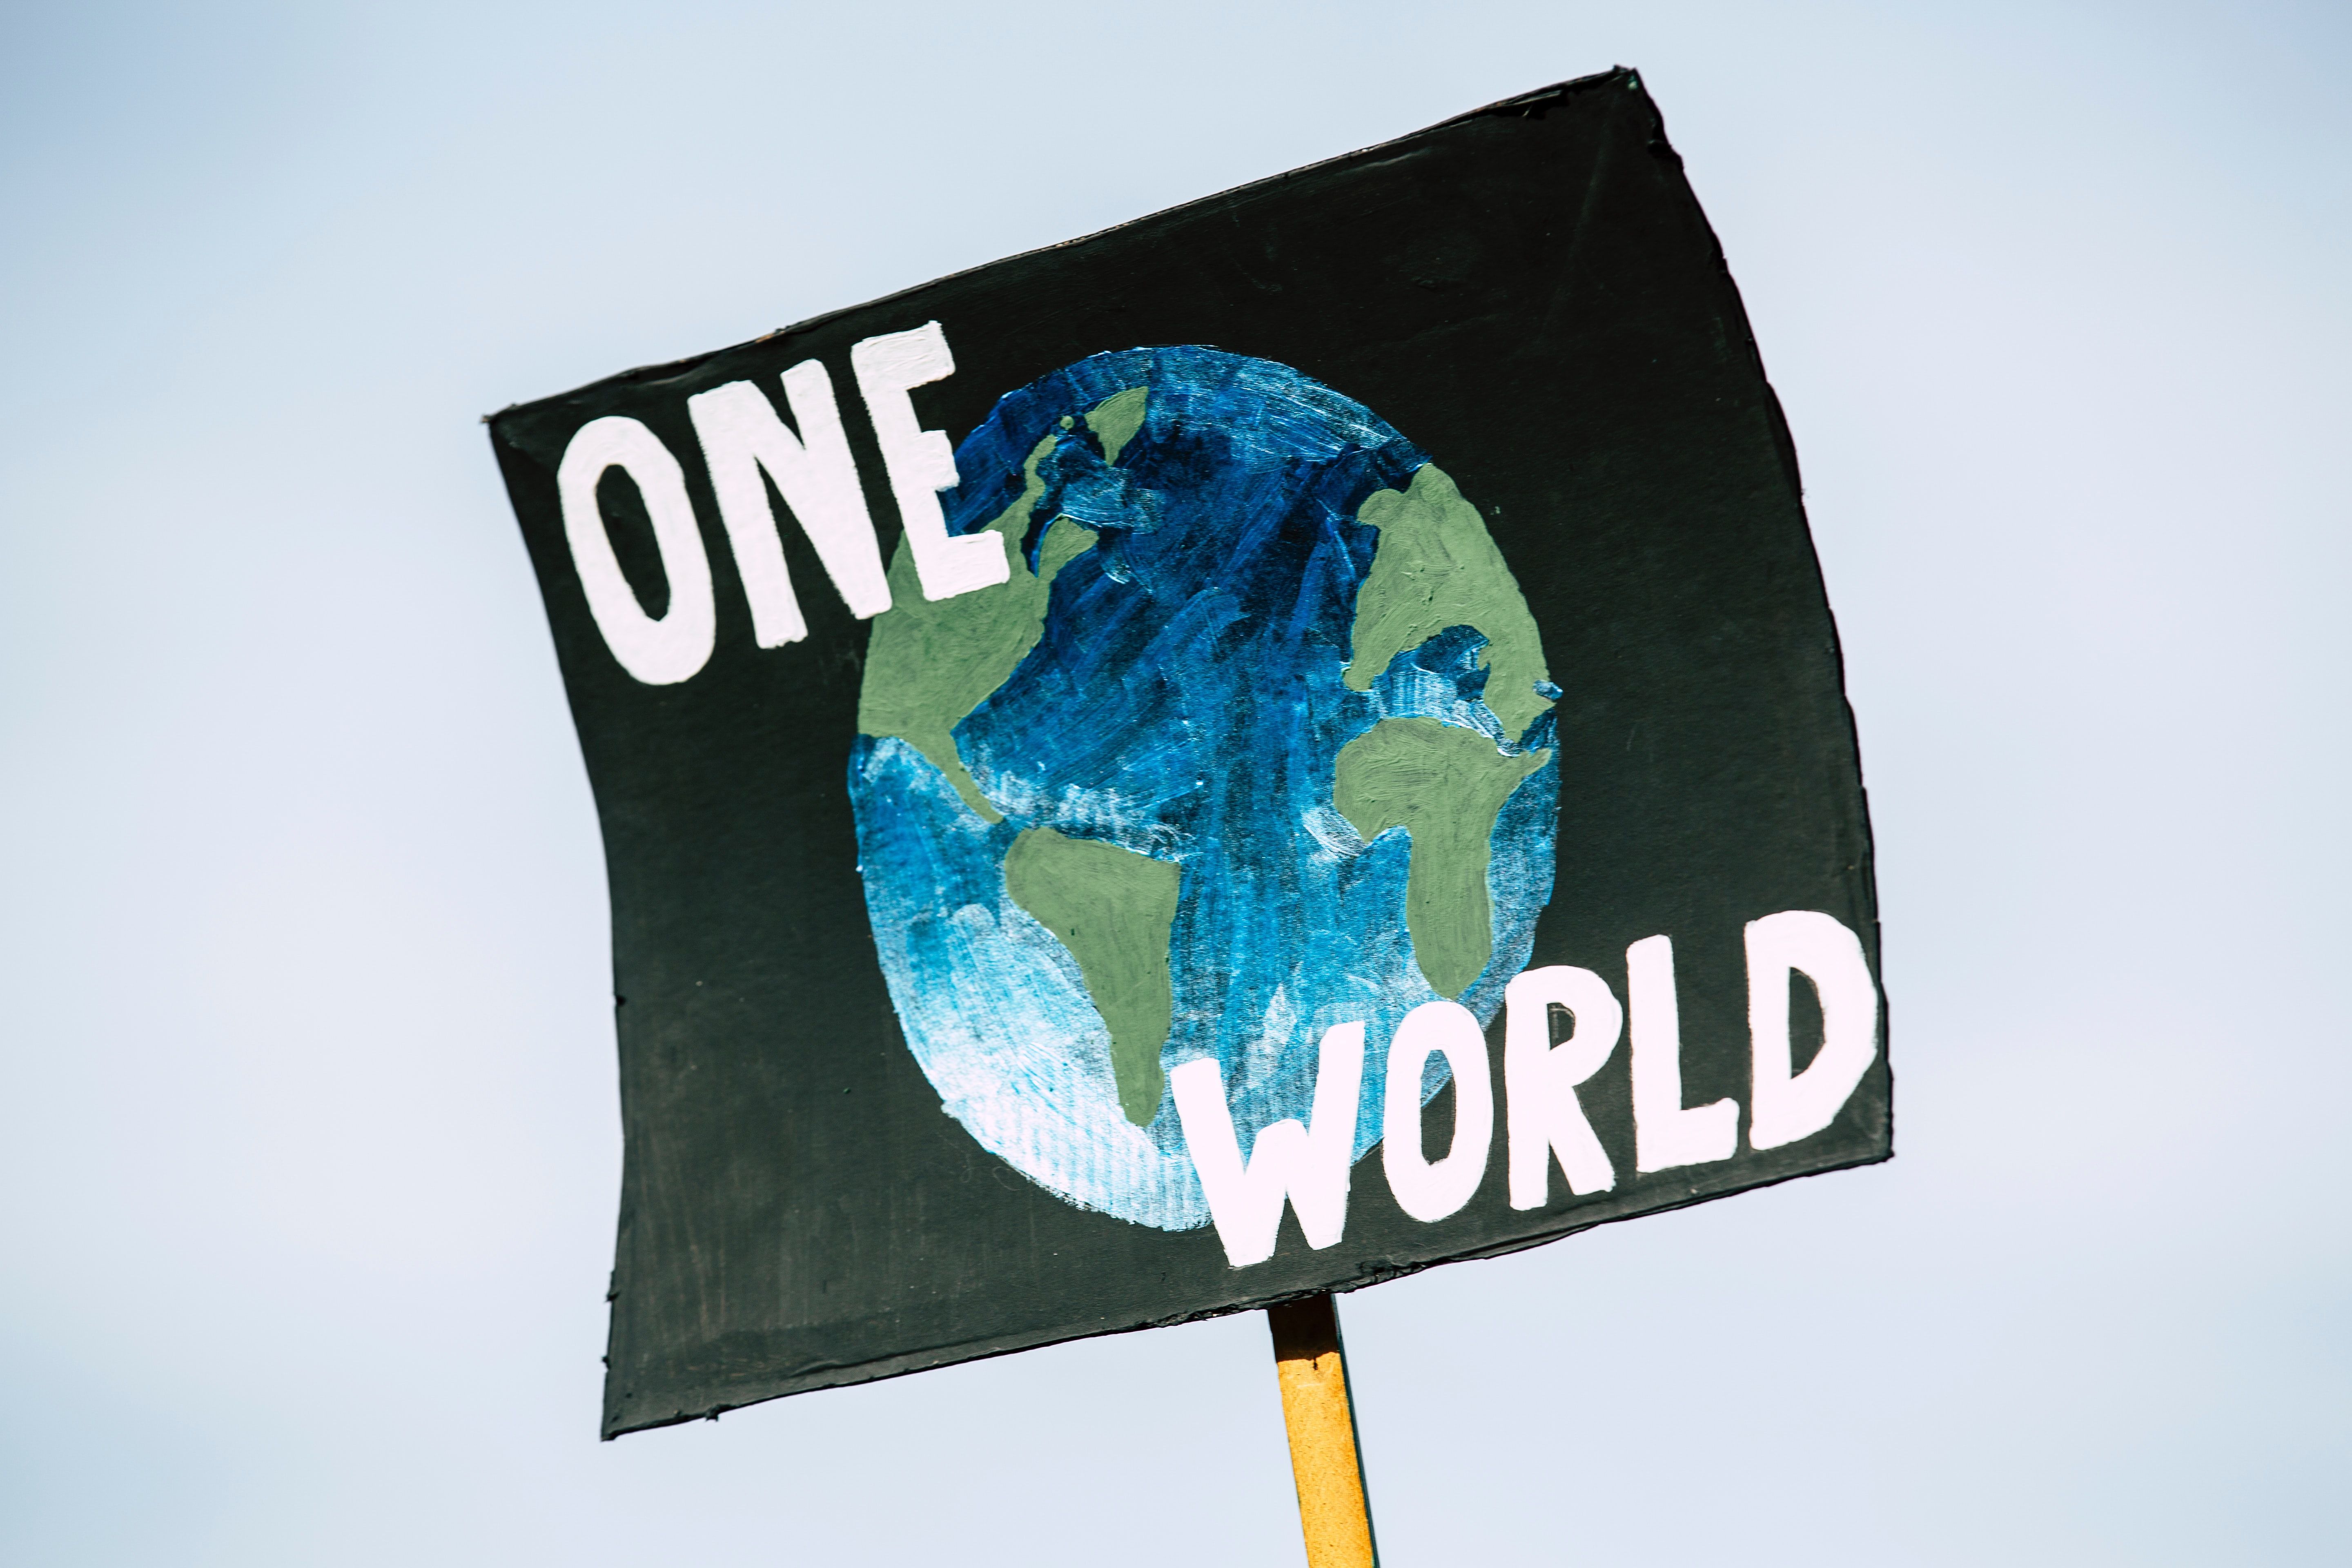 A picket sign that says "One World" over a painting of the planet.